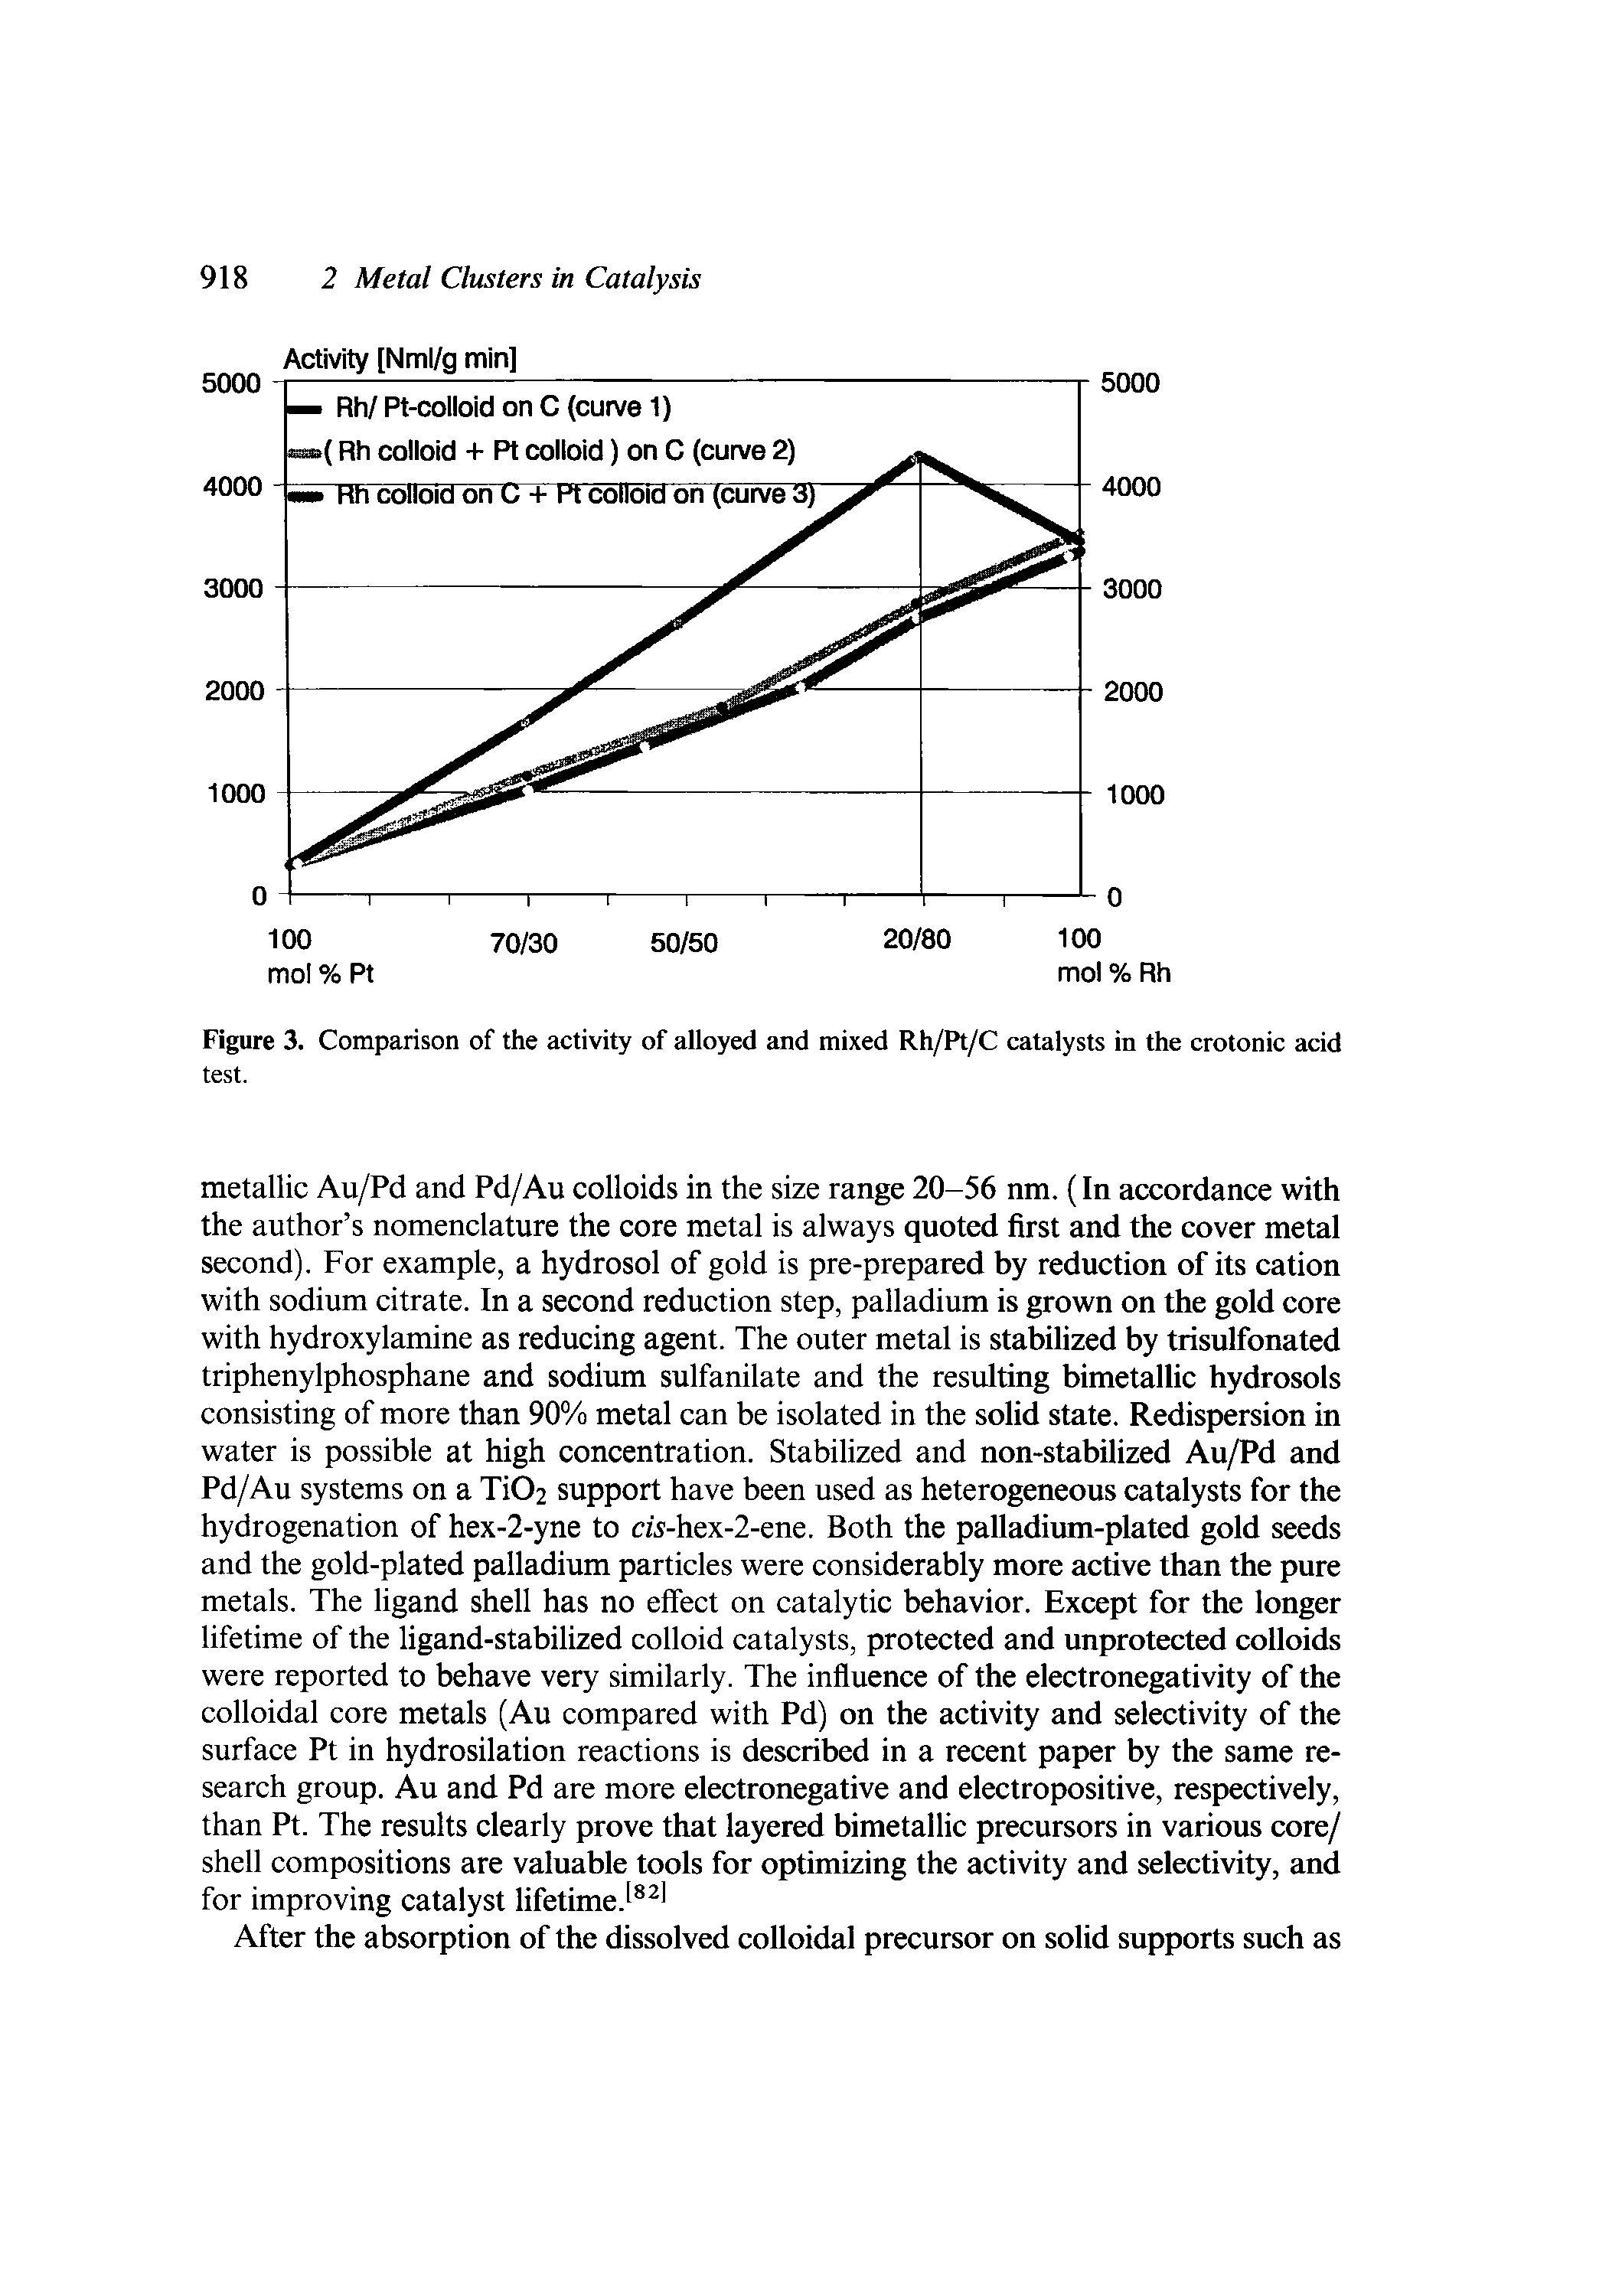 Figure 3. Comparison of the activity of alloyed and mixed Rh/Pt/C catalysts in the crotonic acid test.